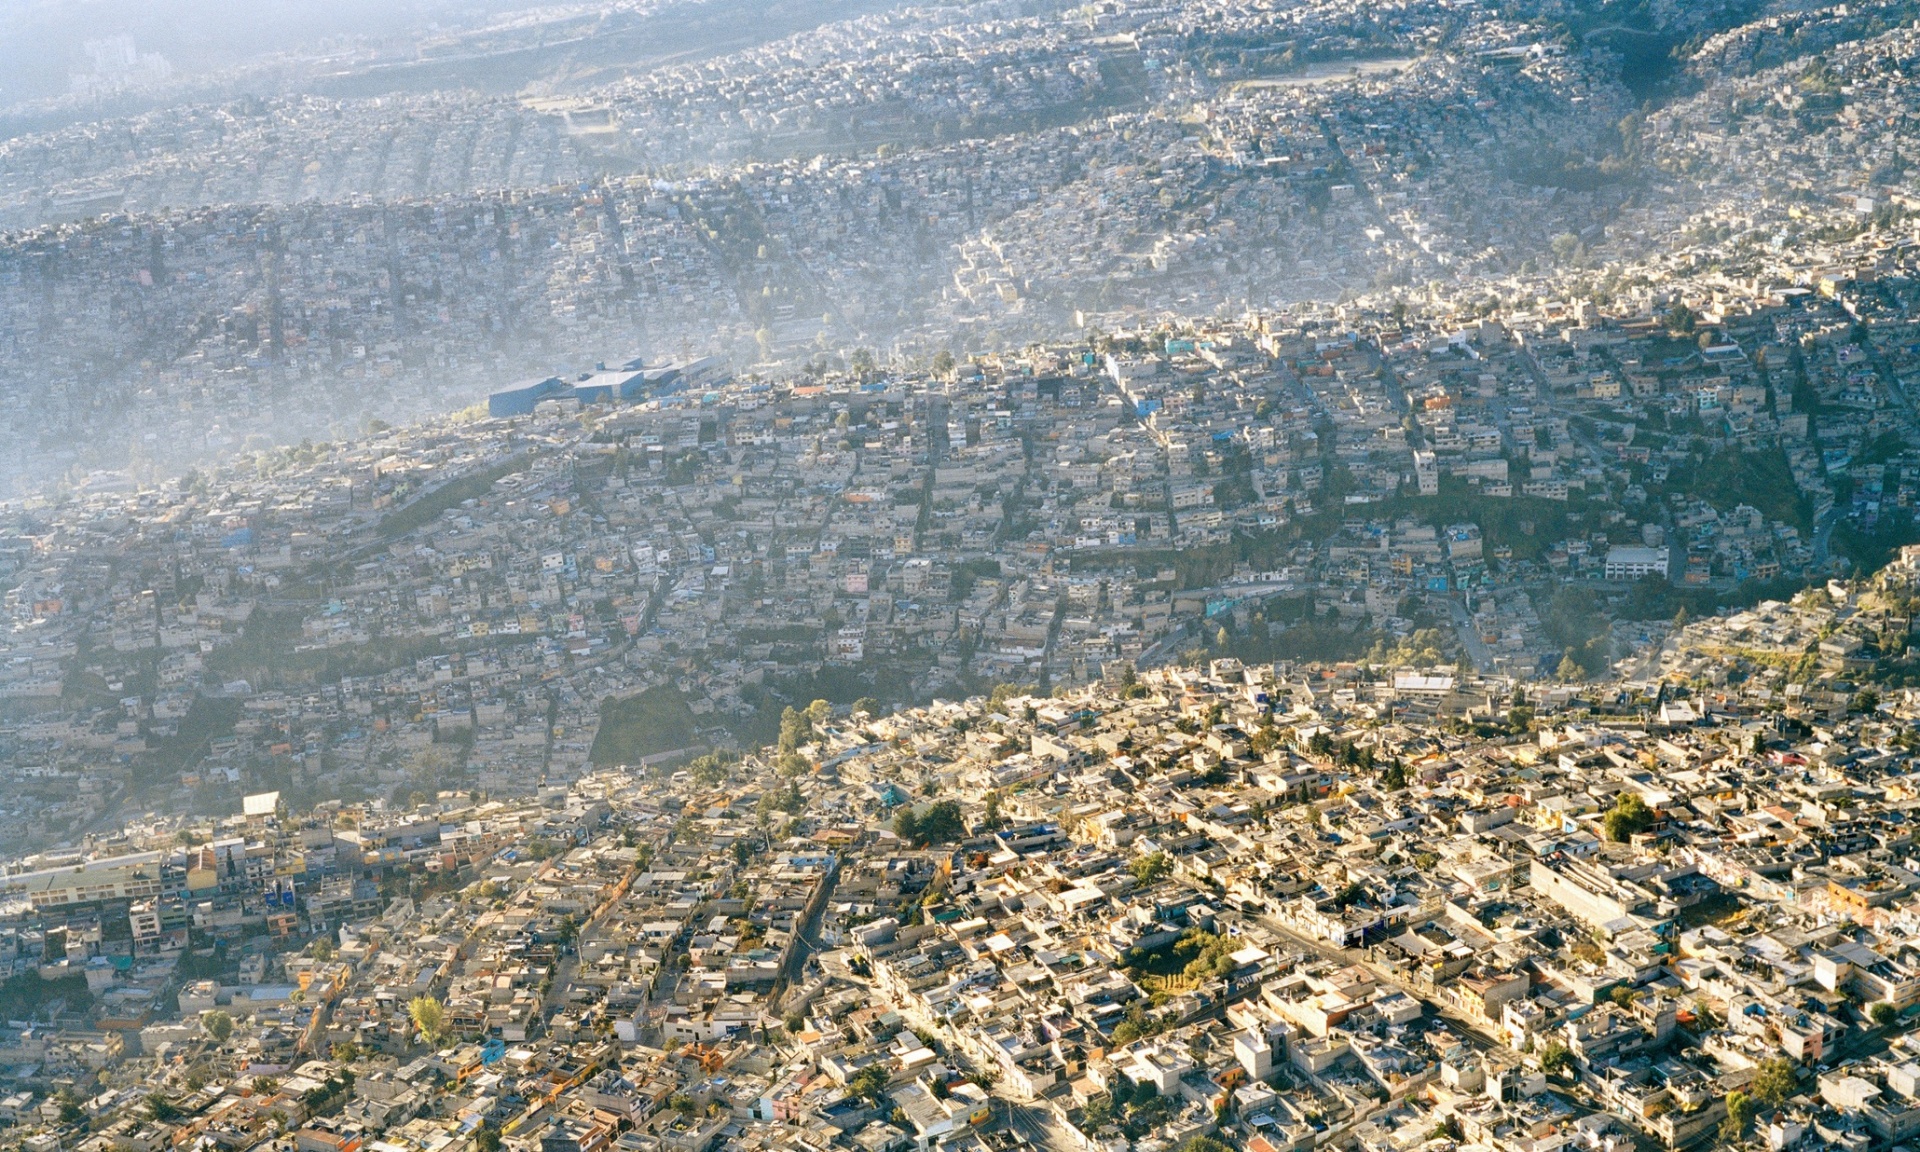 overpopulation and overconsumption on earth in pictures